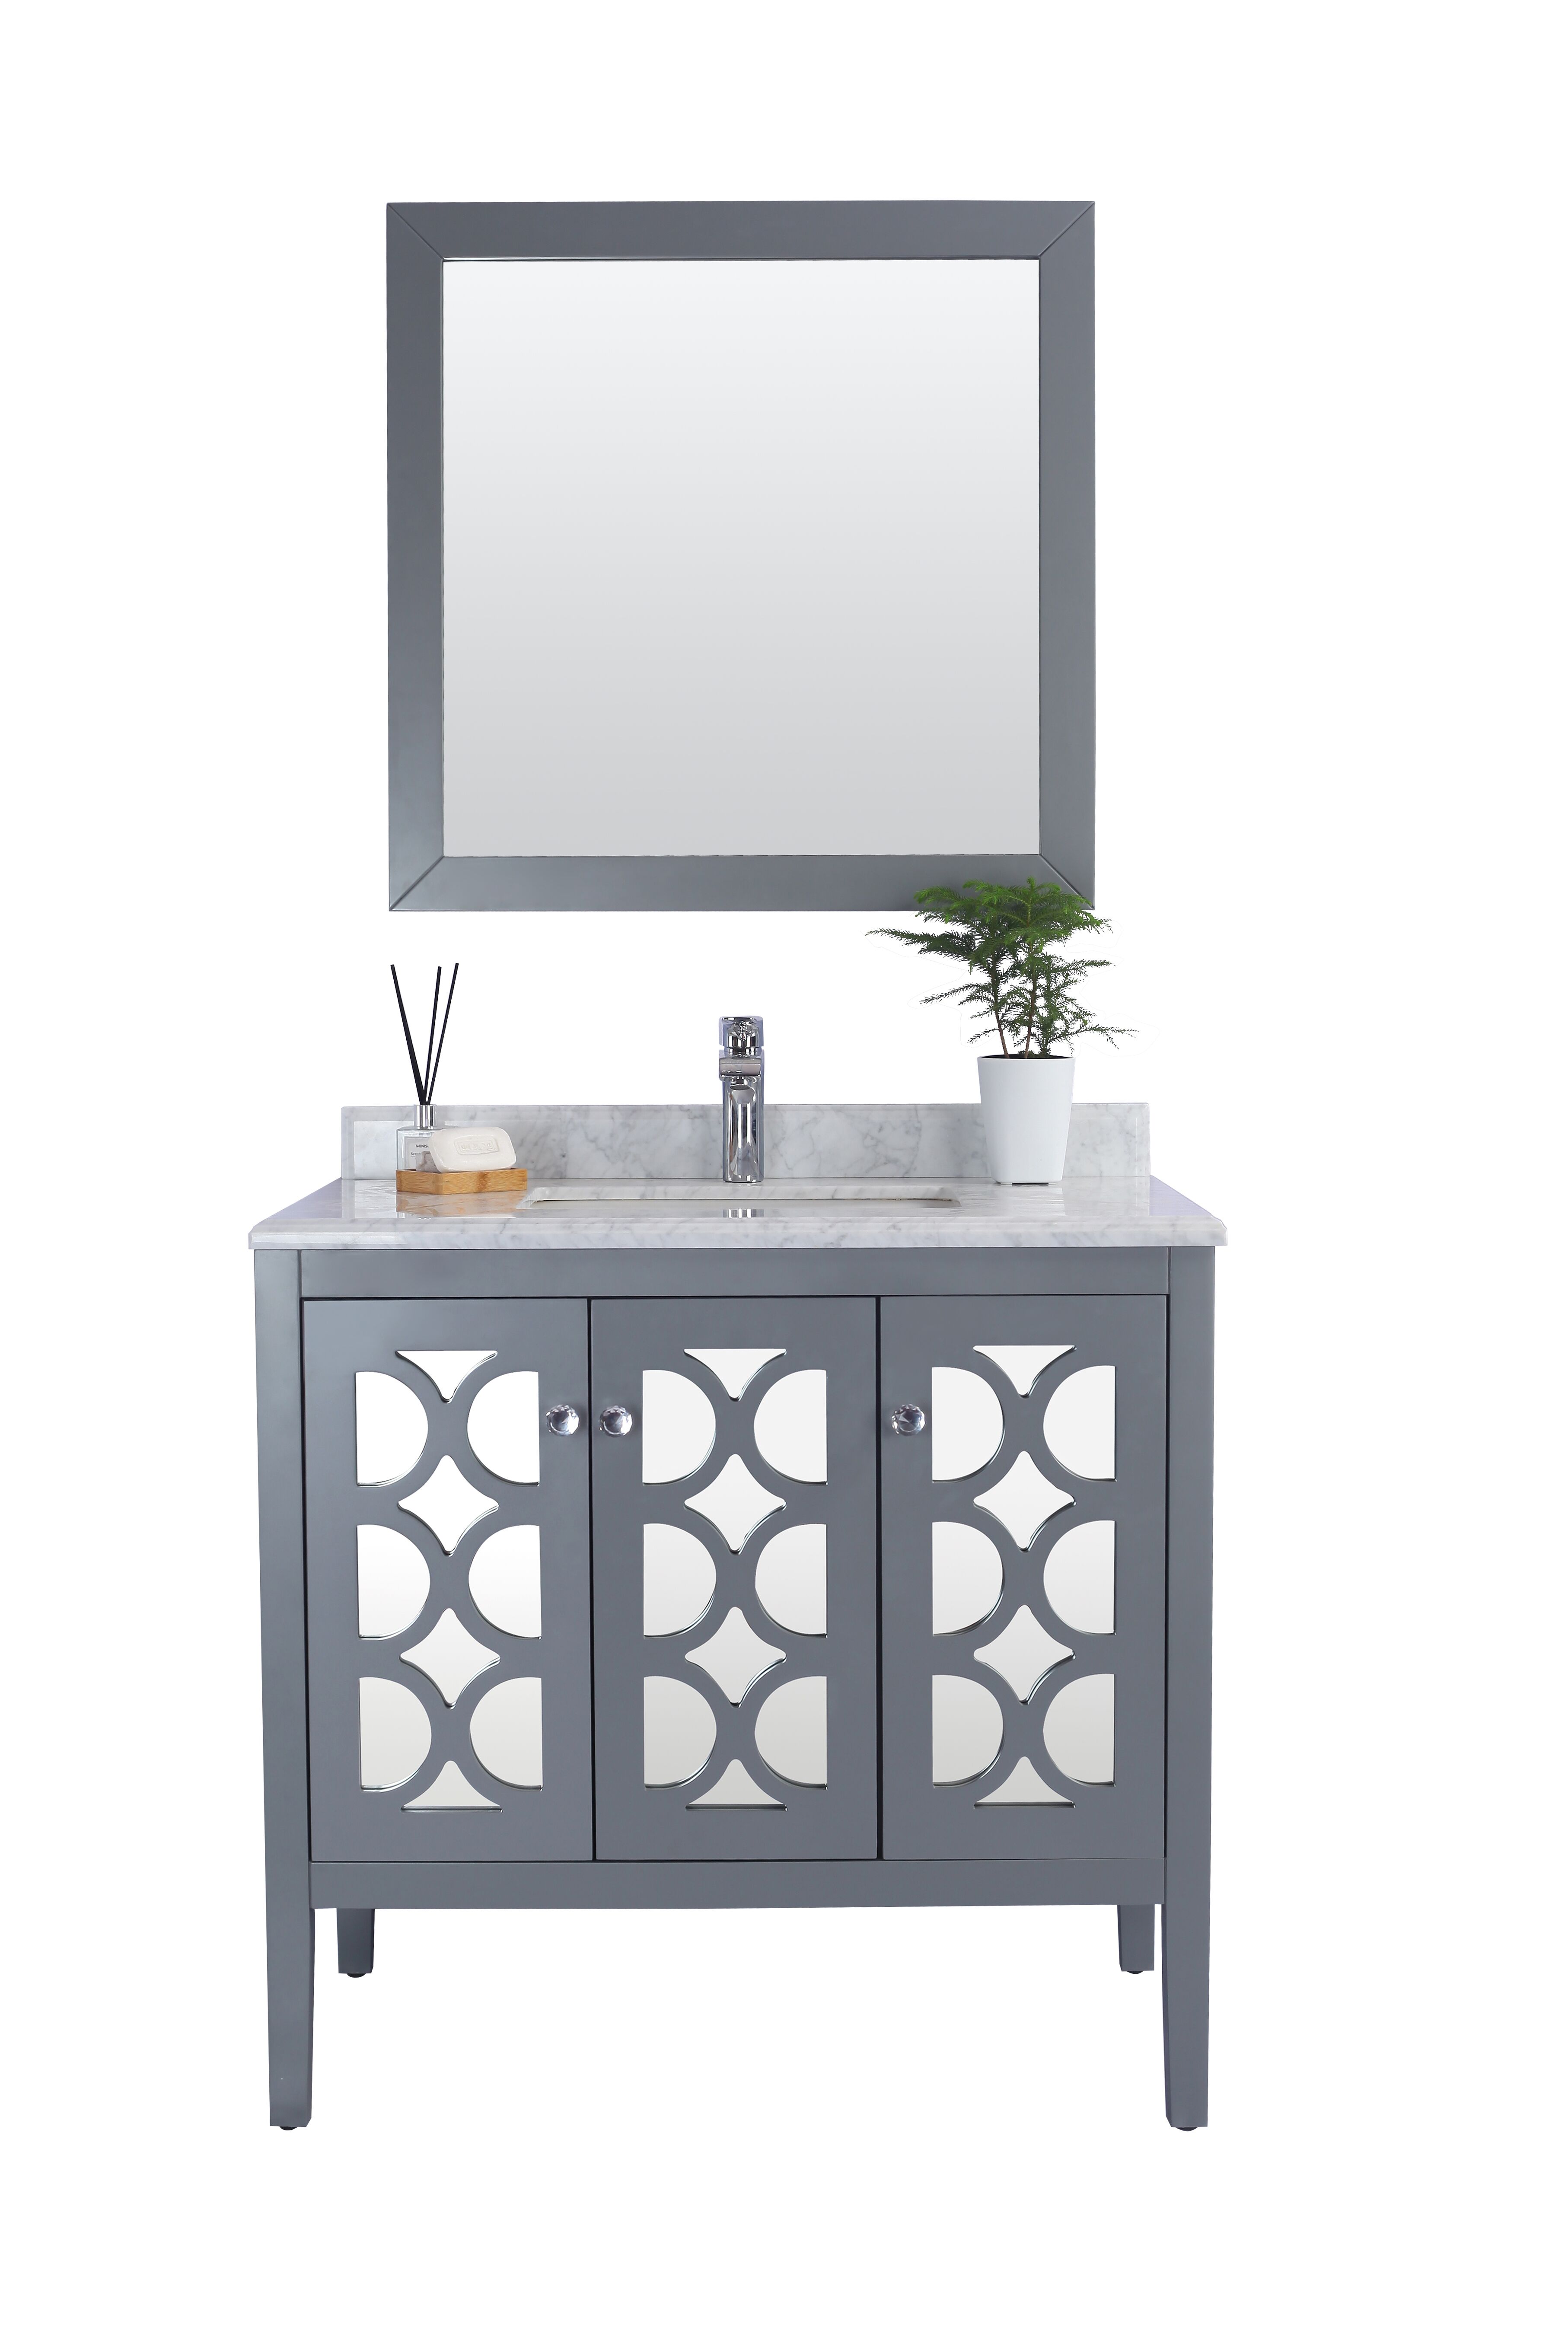 36" Single Bathroom Vanity Cabinet with Top and Color Options